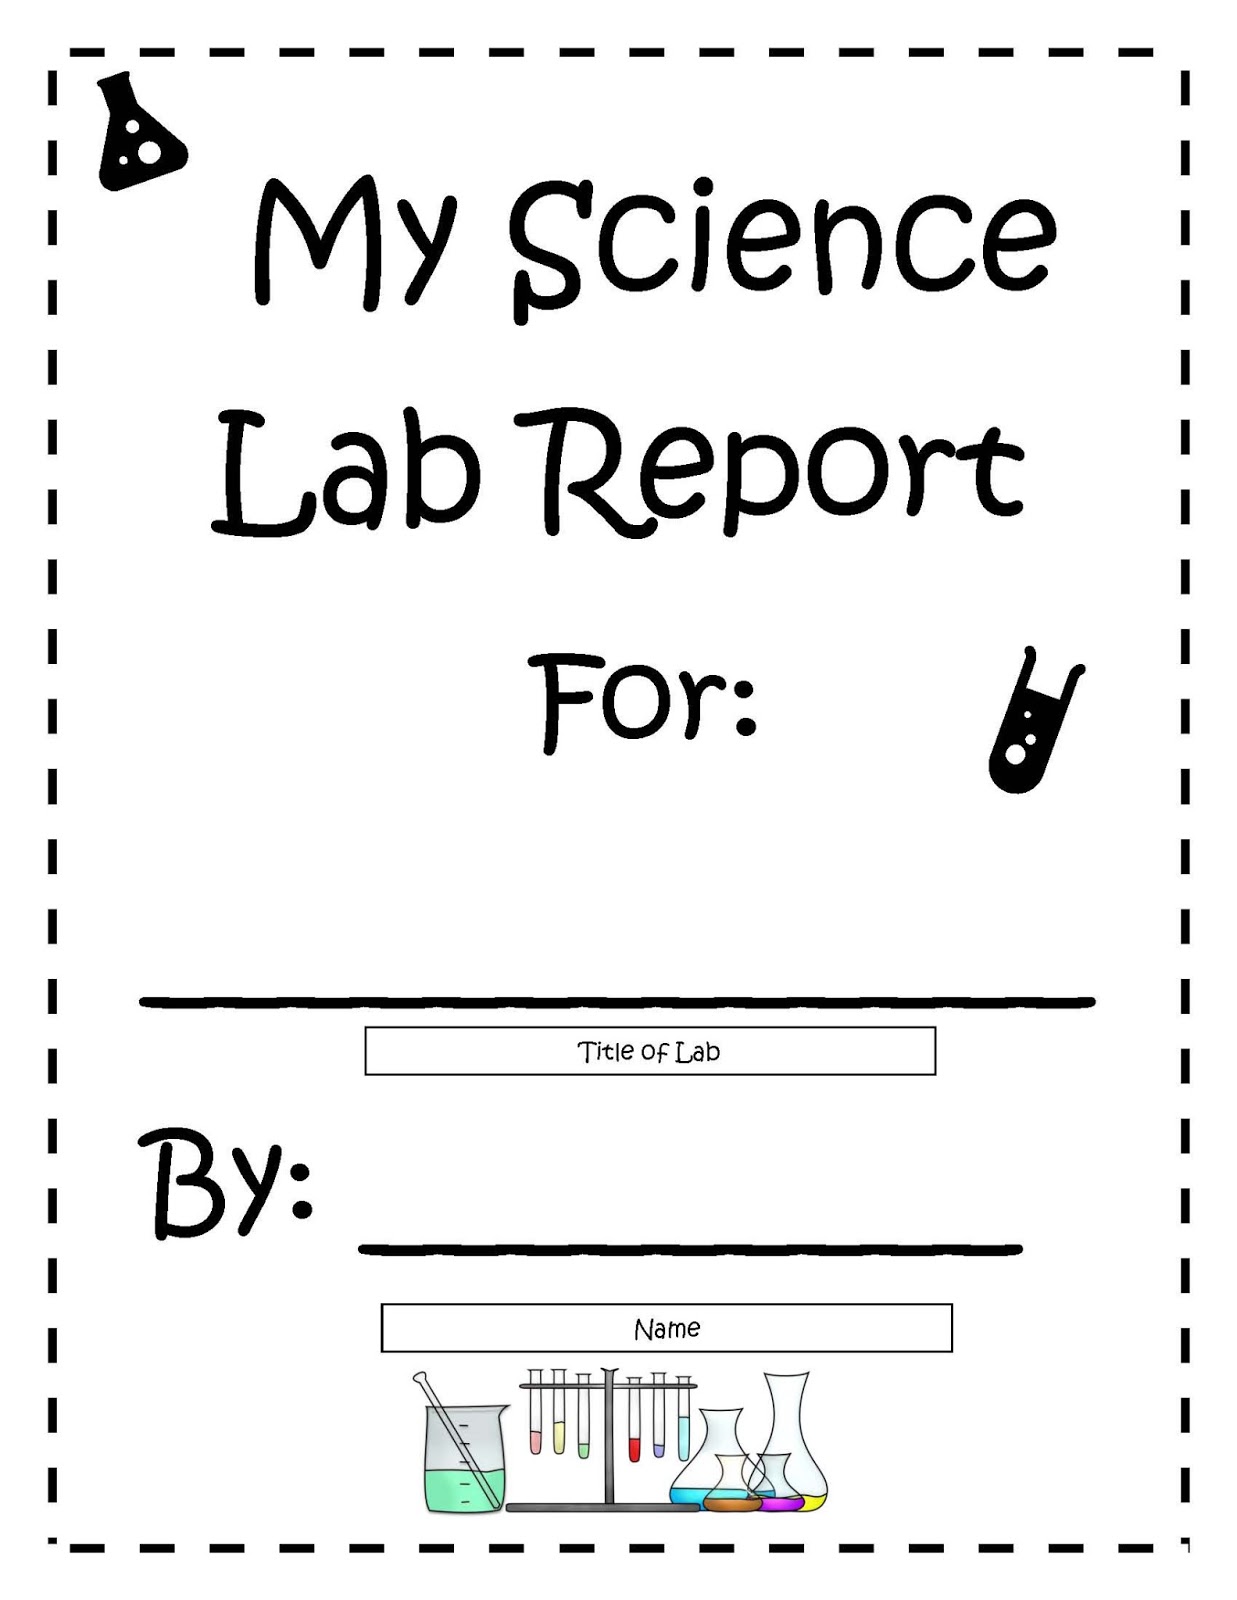 How to write experiment report